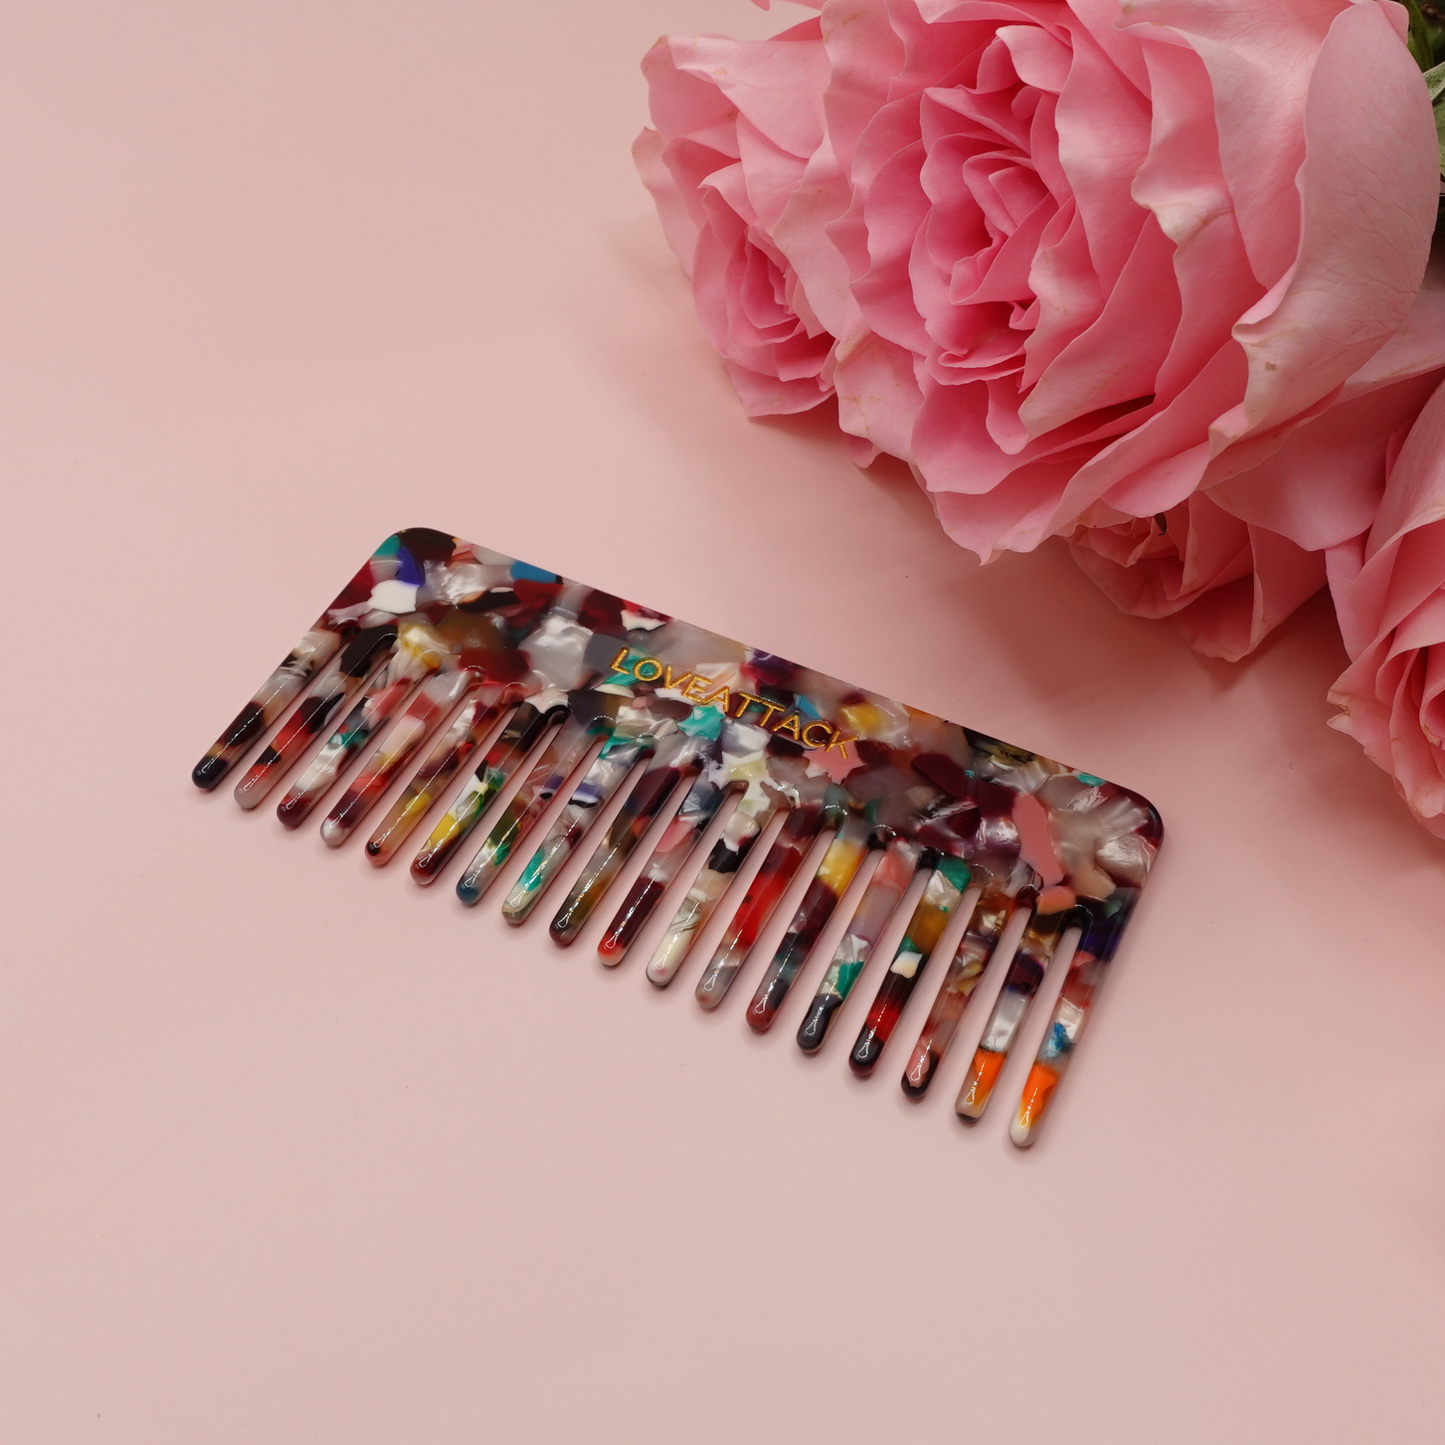 Wide Tooth Detangling Cellulose Acetate  Hair Combs: Dark Tortoiseshell